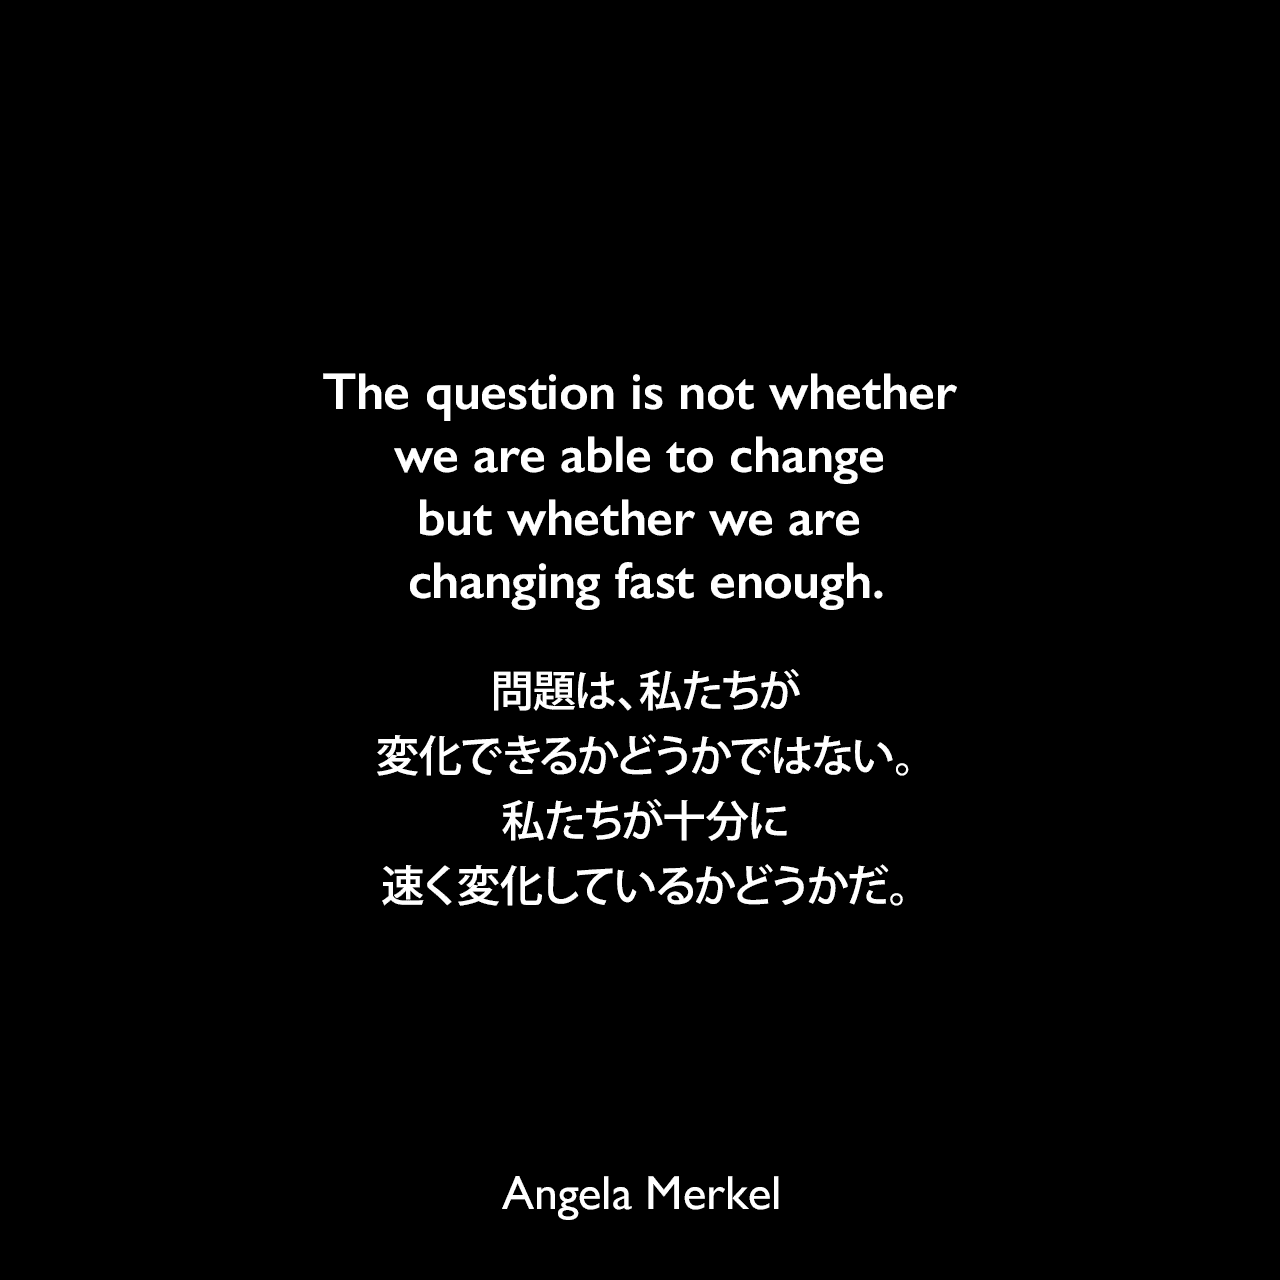 The question is not whether we are able to change but whether we are changing fast enough.問題は、私たちが変化できるかどうかではない。私たちが十分に速く変化しているかどうかだ。